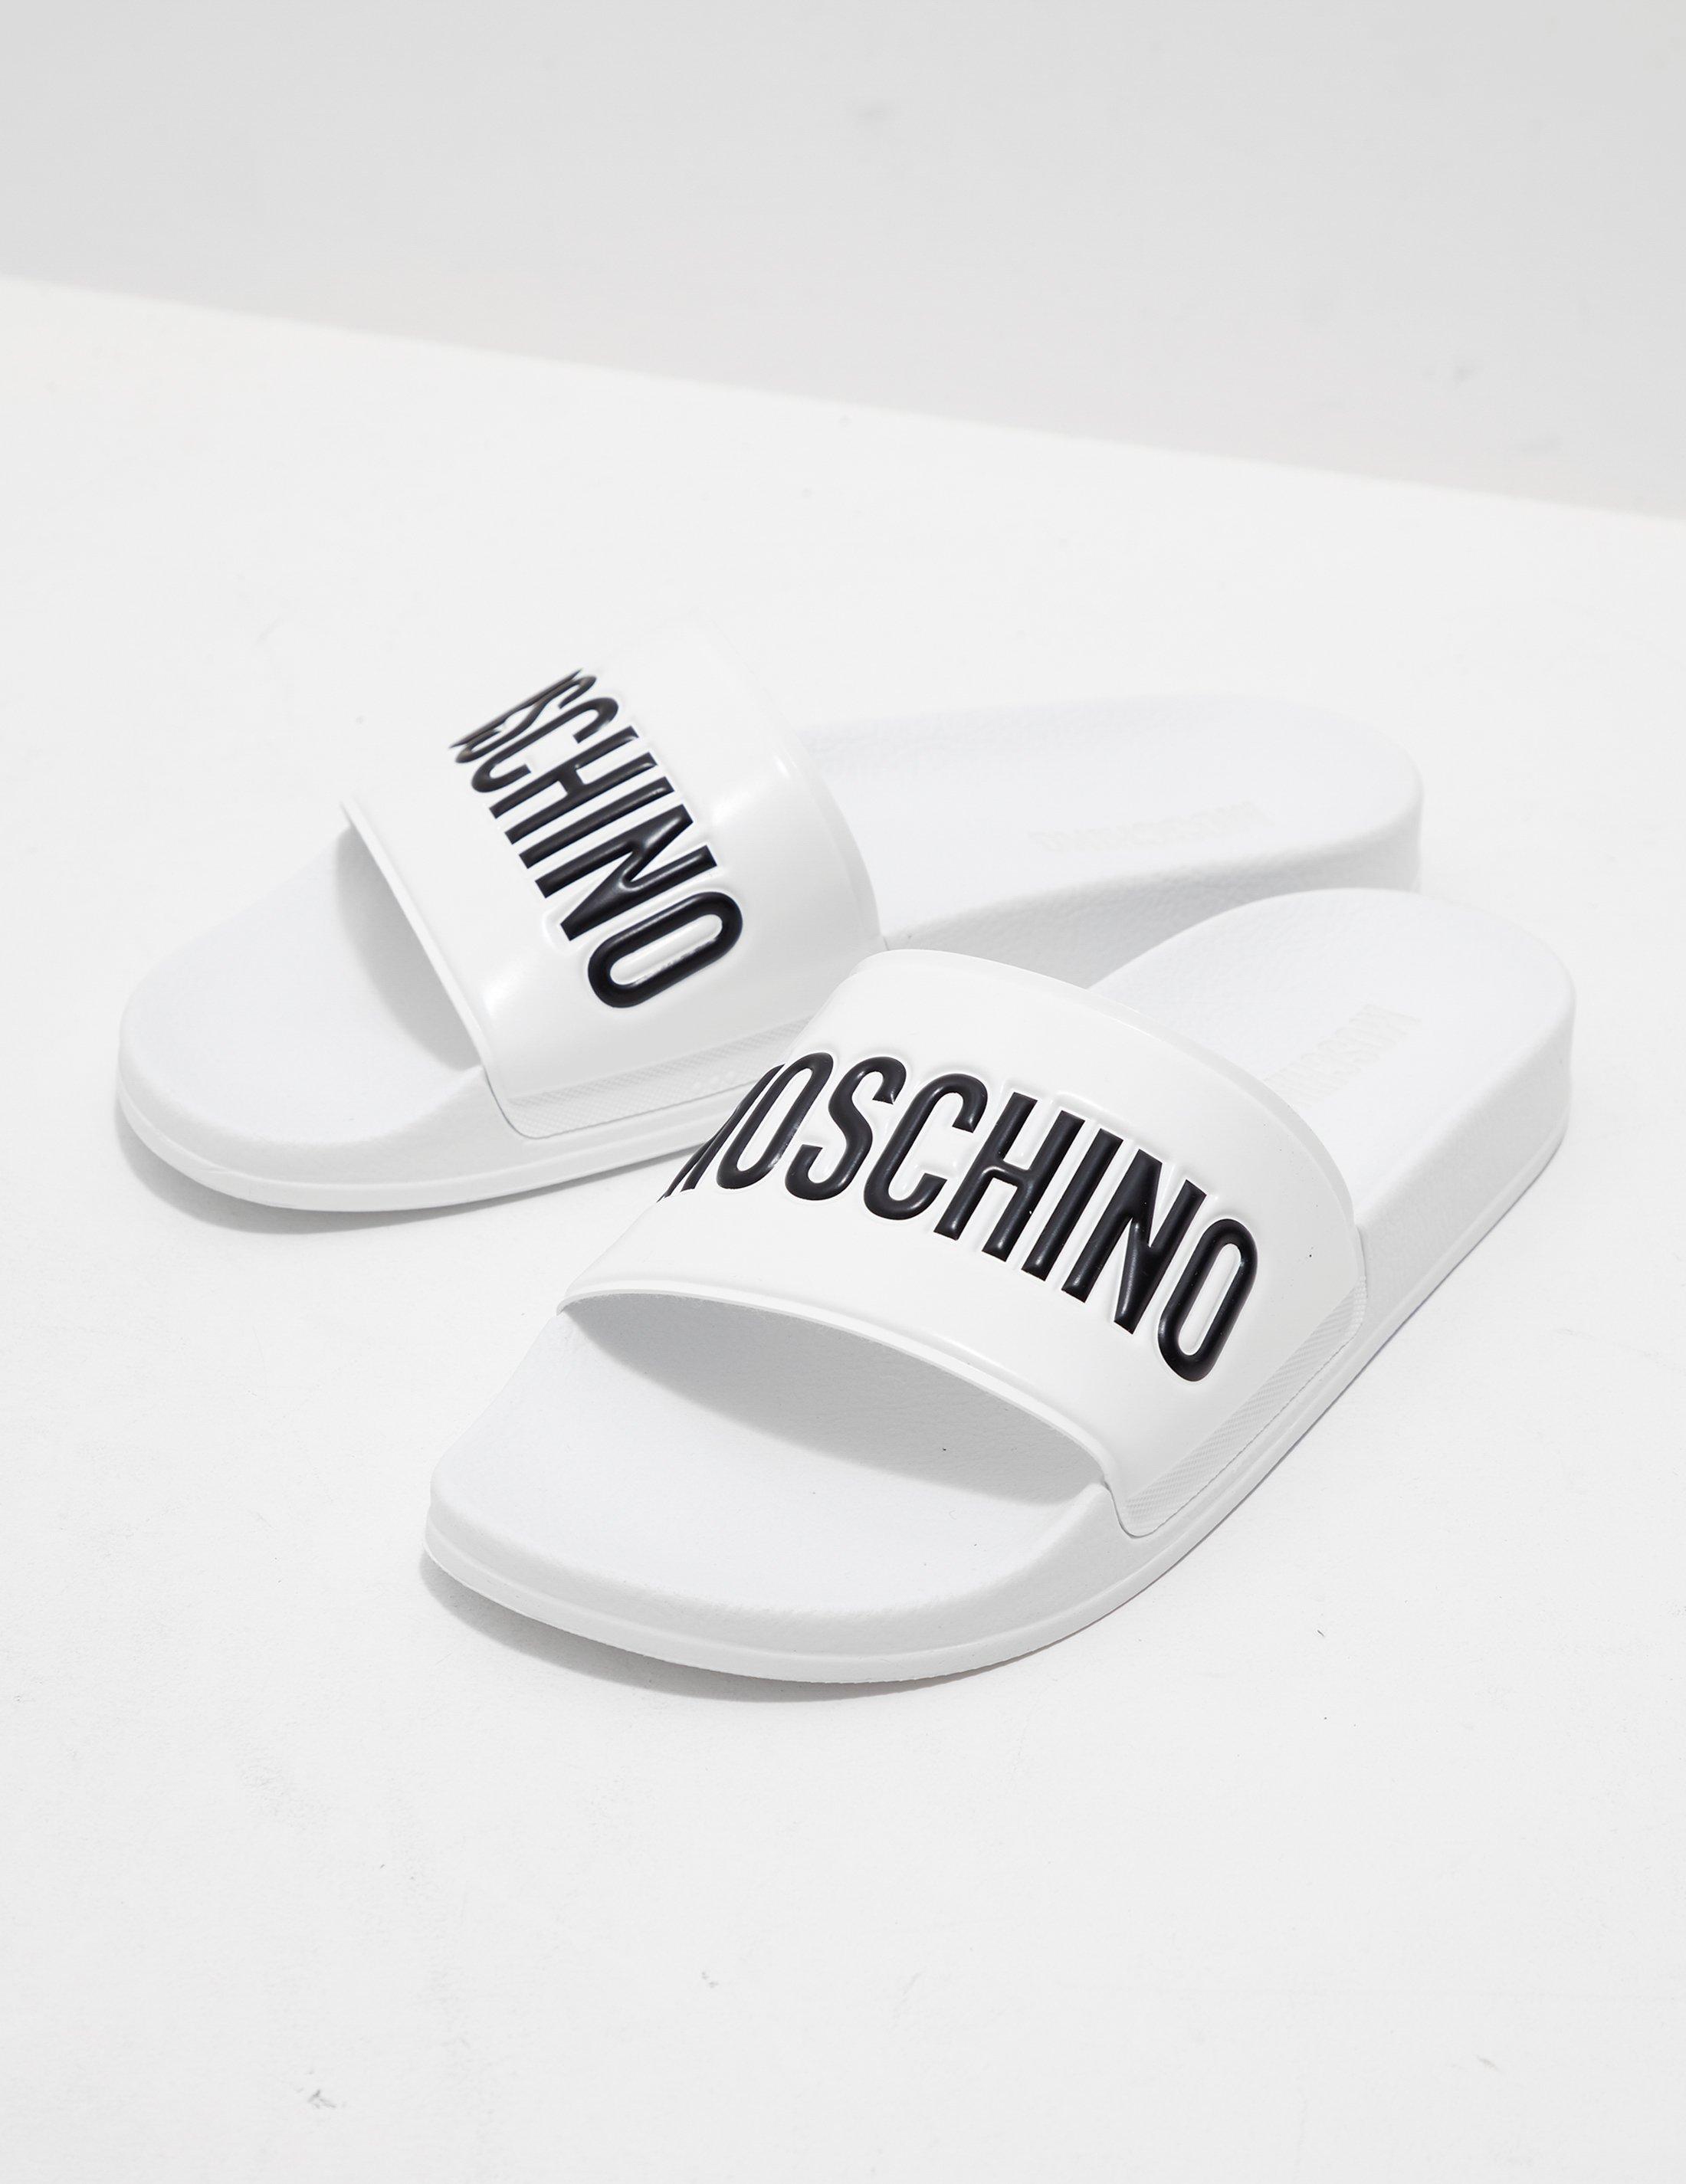 Moschino Synthetic Logo Slides in White 